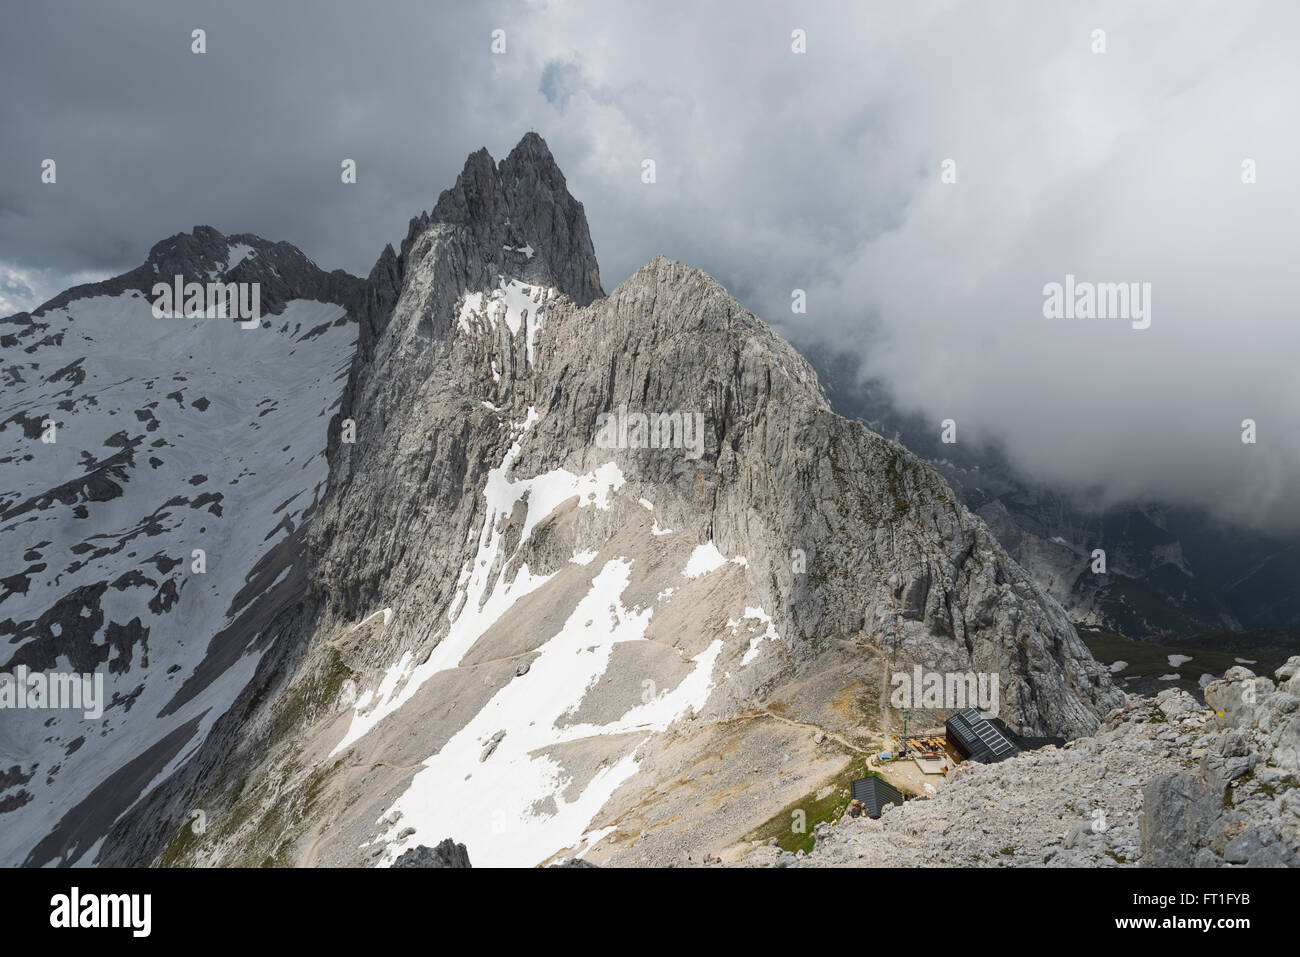 Sunshine and clouds above the Meilerhuette mountain hut and Mount Partenkirchner Dreitorspitze in the Wetterstein mountain range Stock Photo